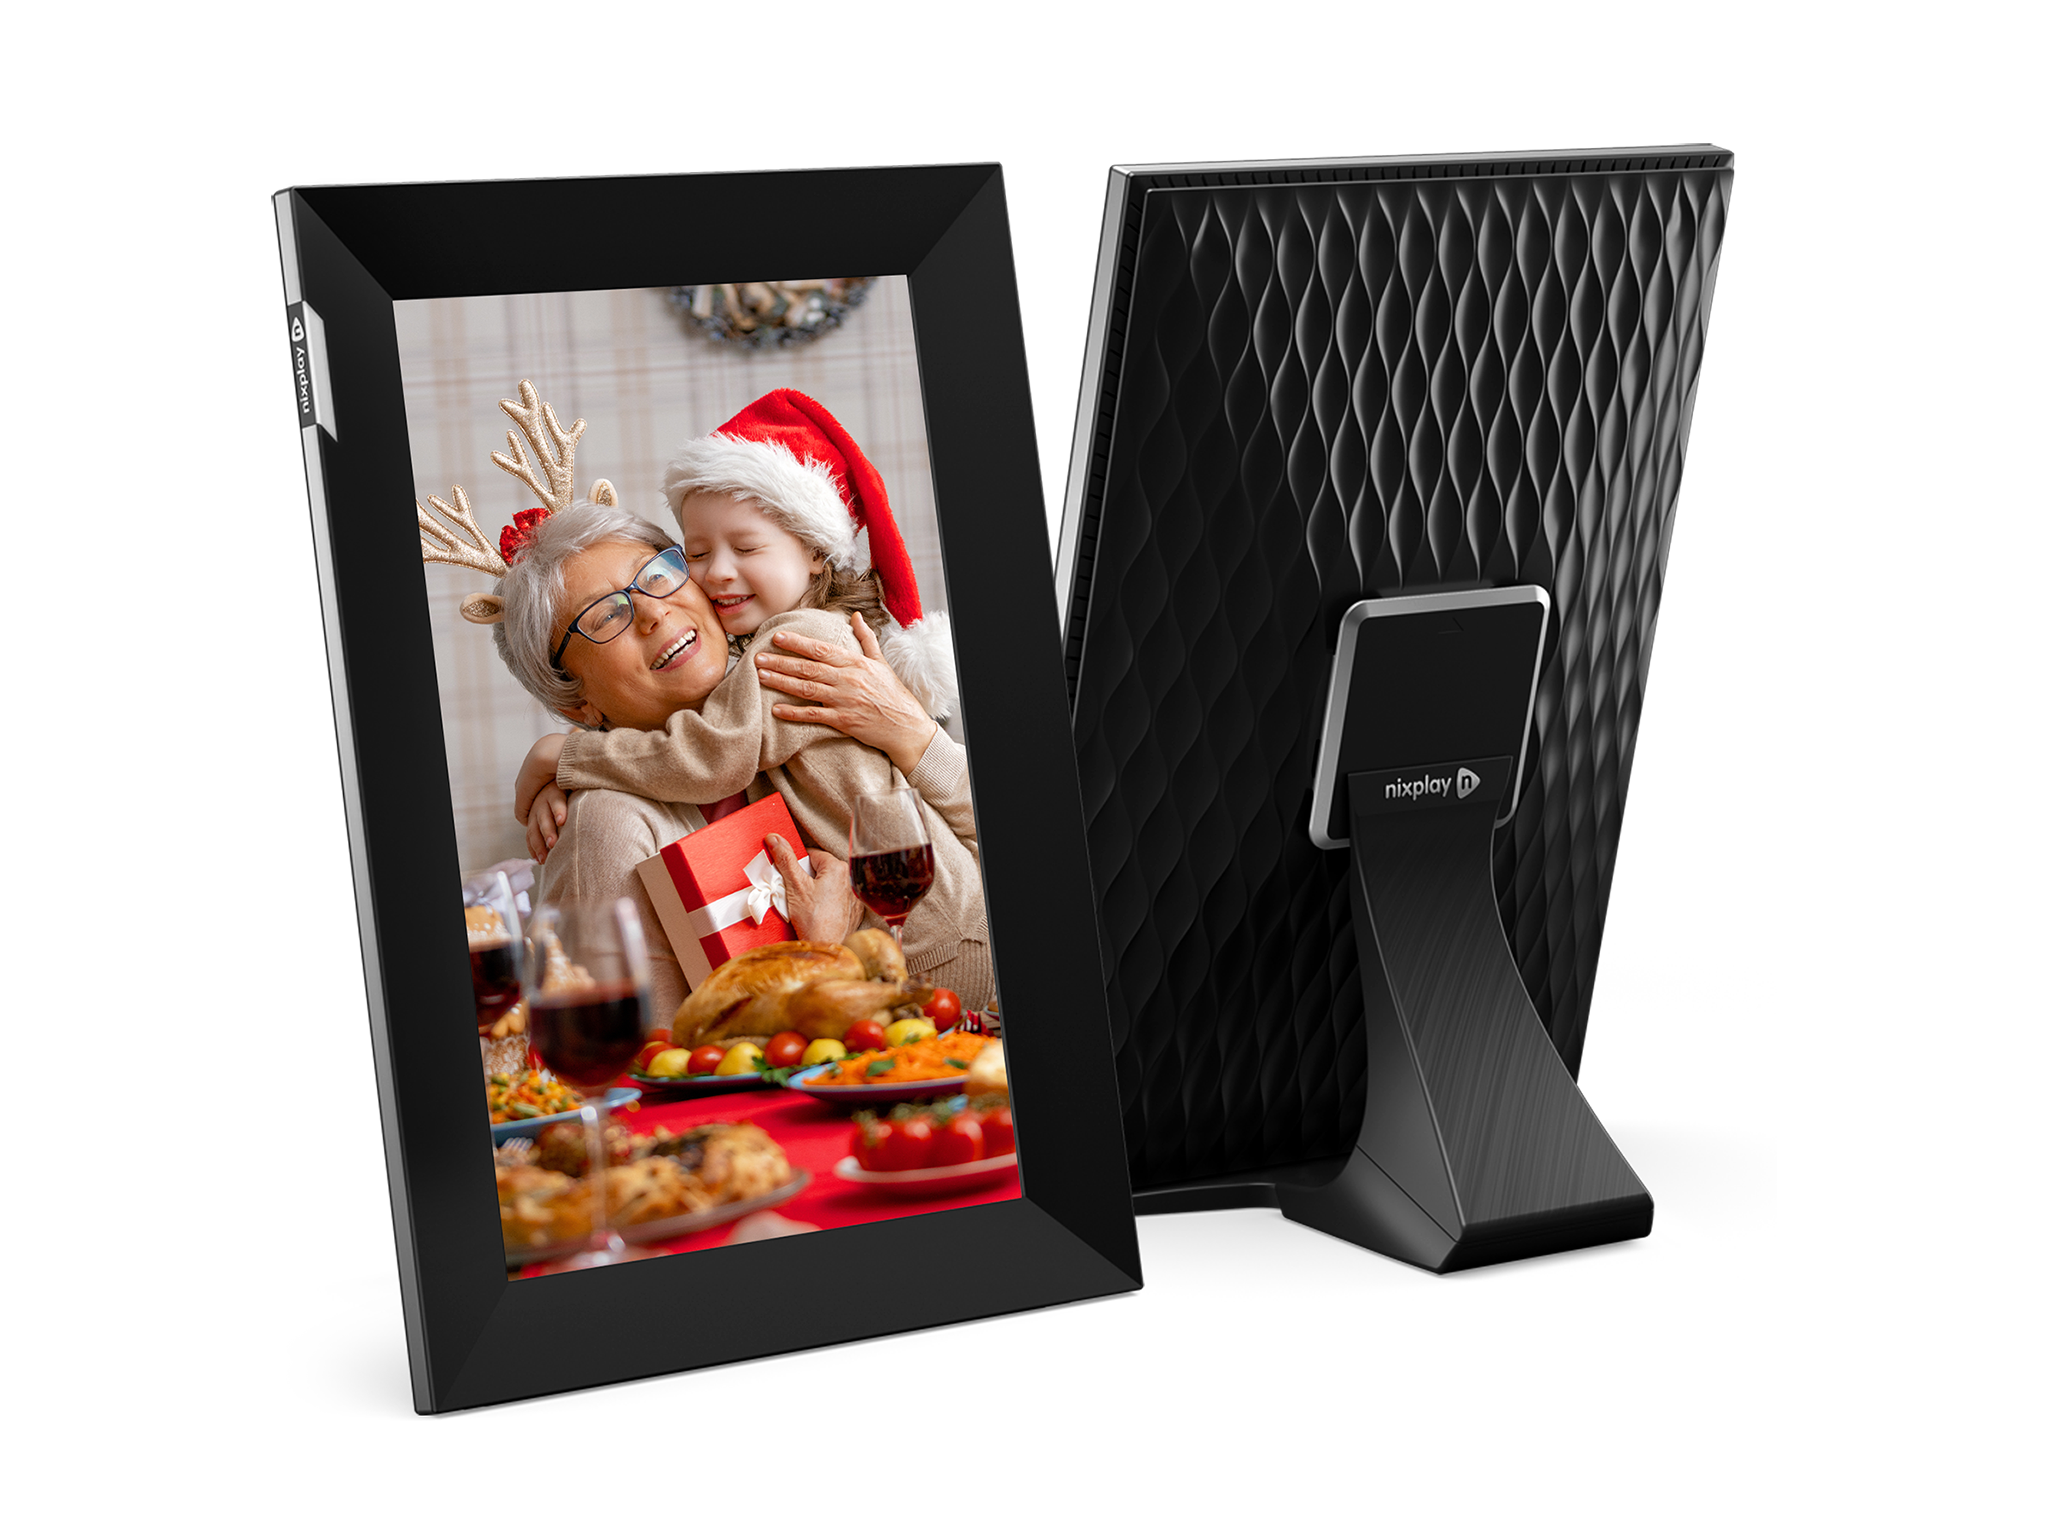 Nixplay 10.1-inch touch screen photo frame